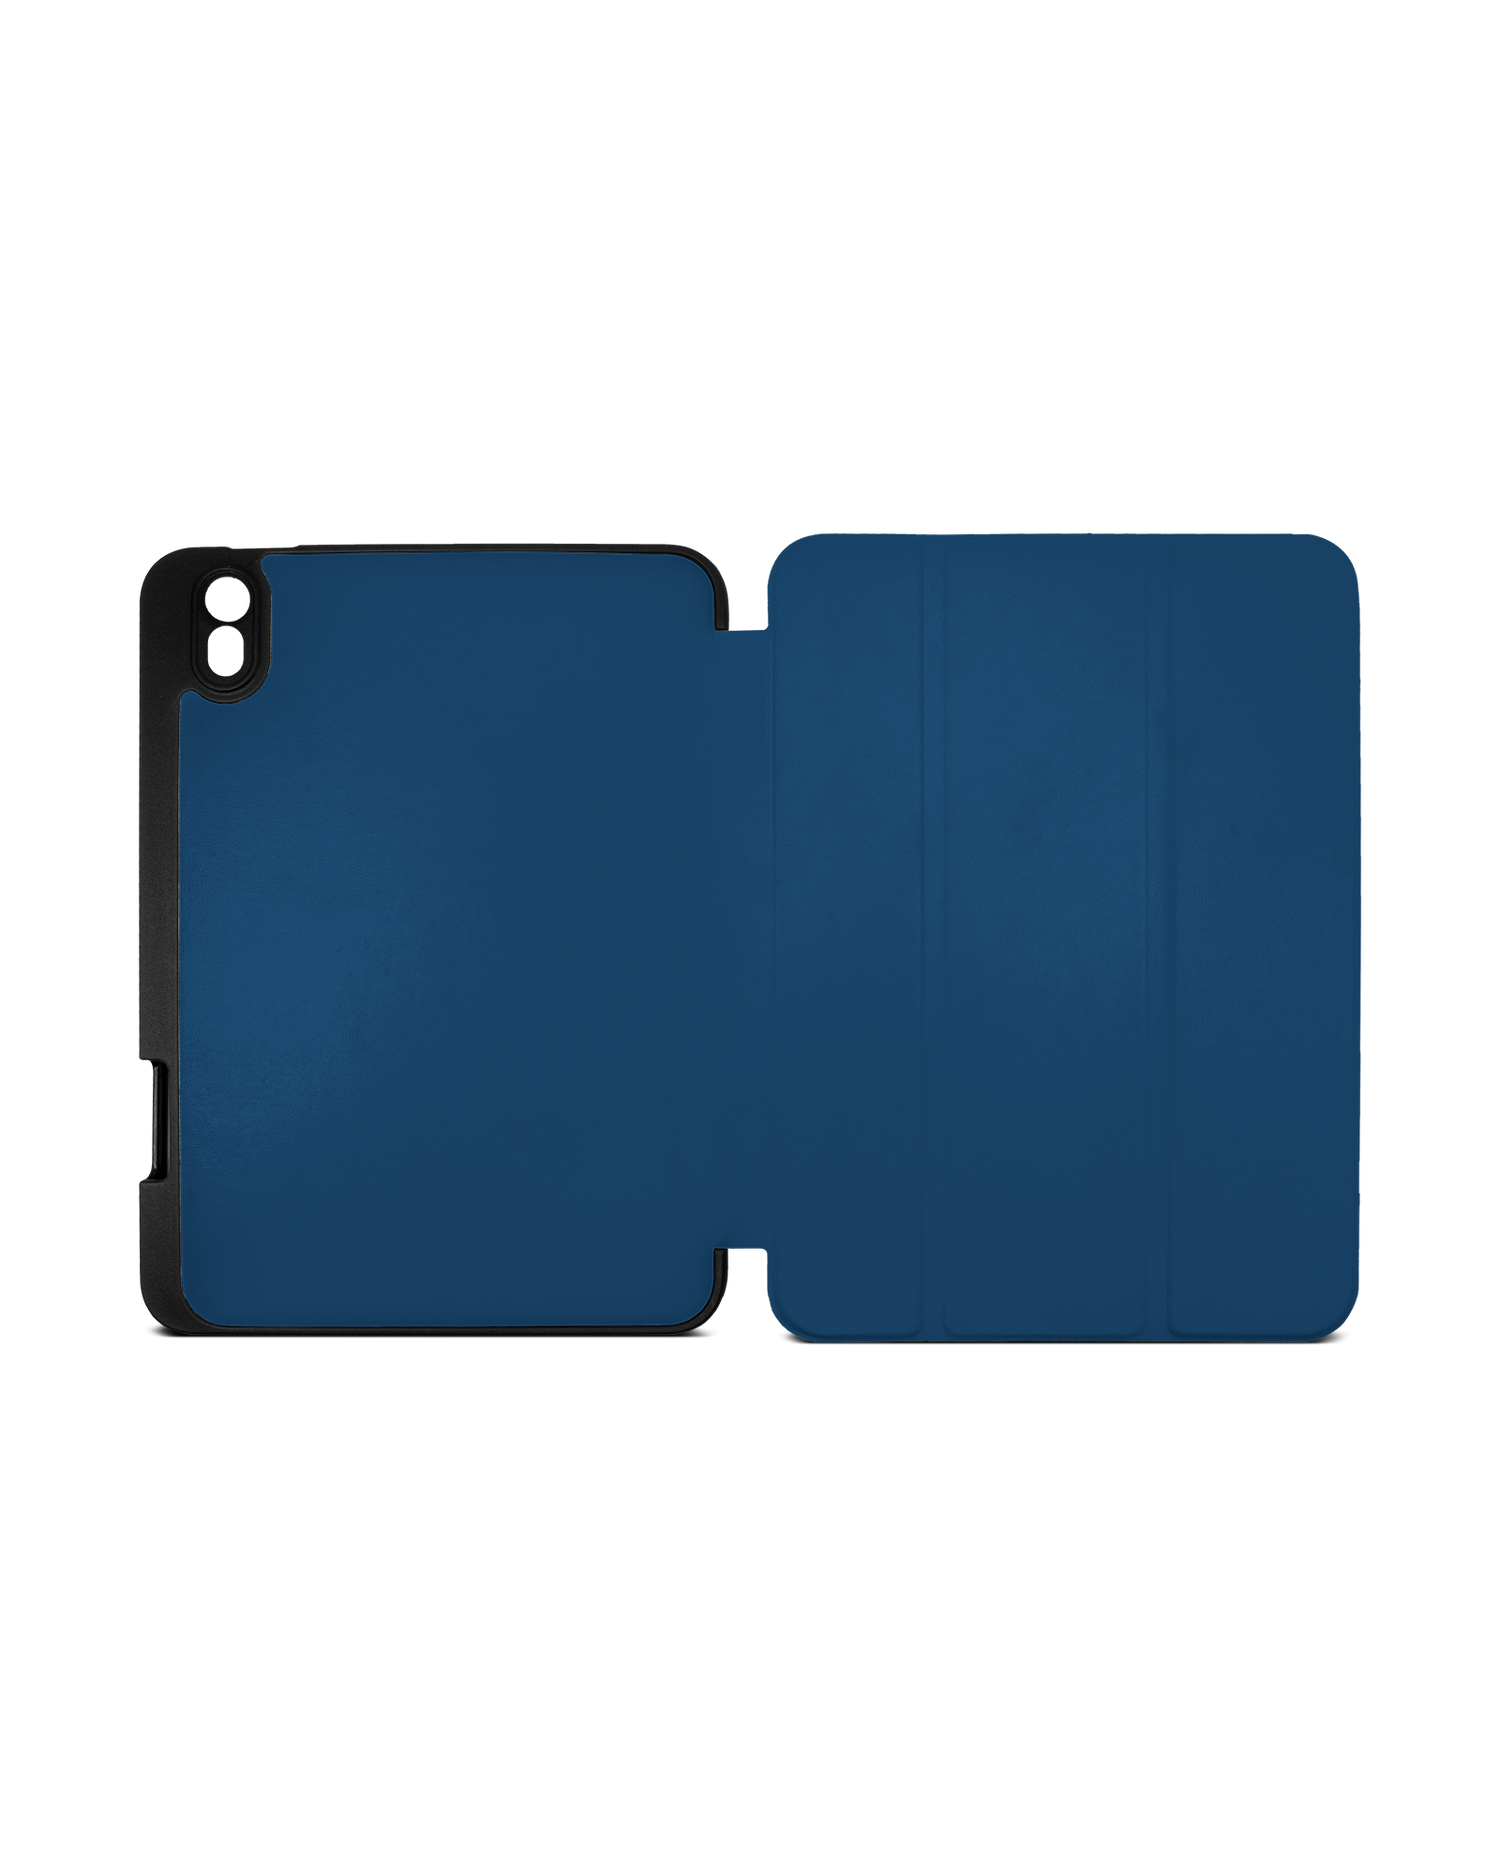 CLASSIC BLUE iPad Case with Pencil Holder Apple iPad mini 6 (2021): Opened exterior view